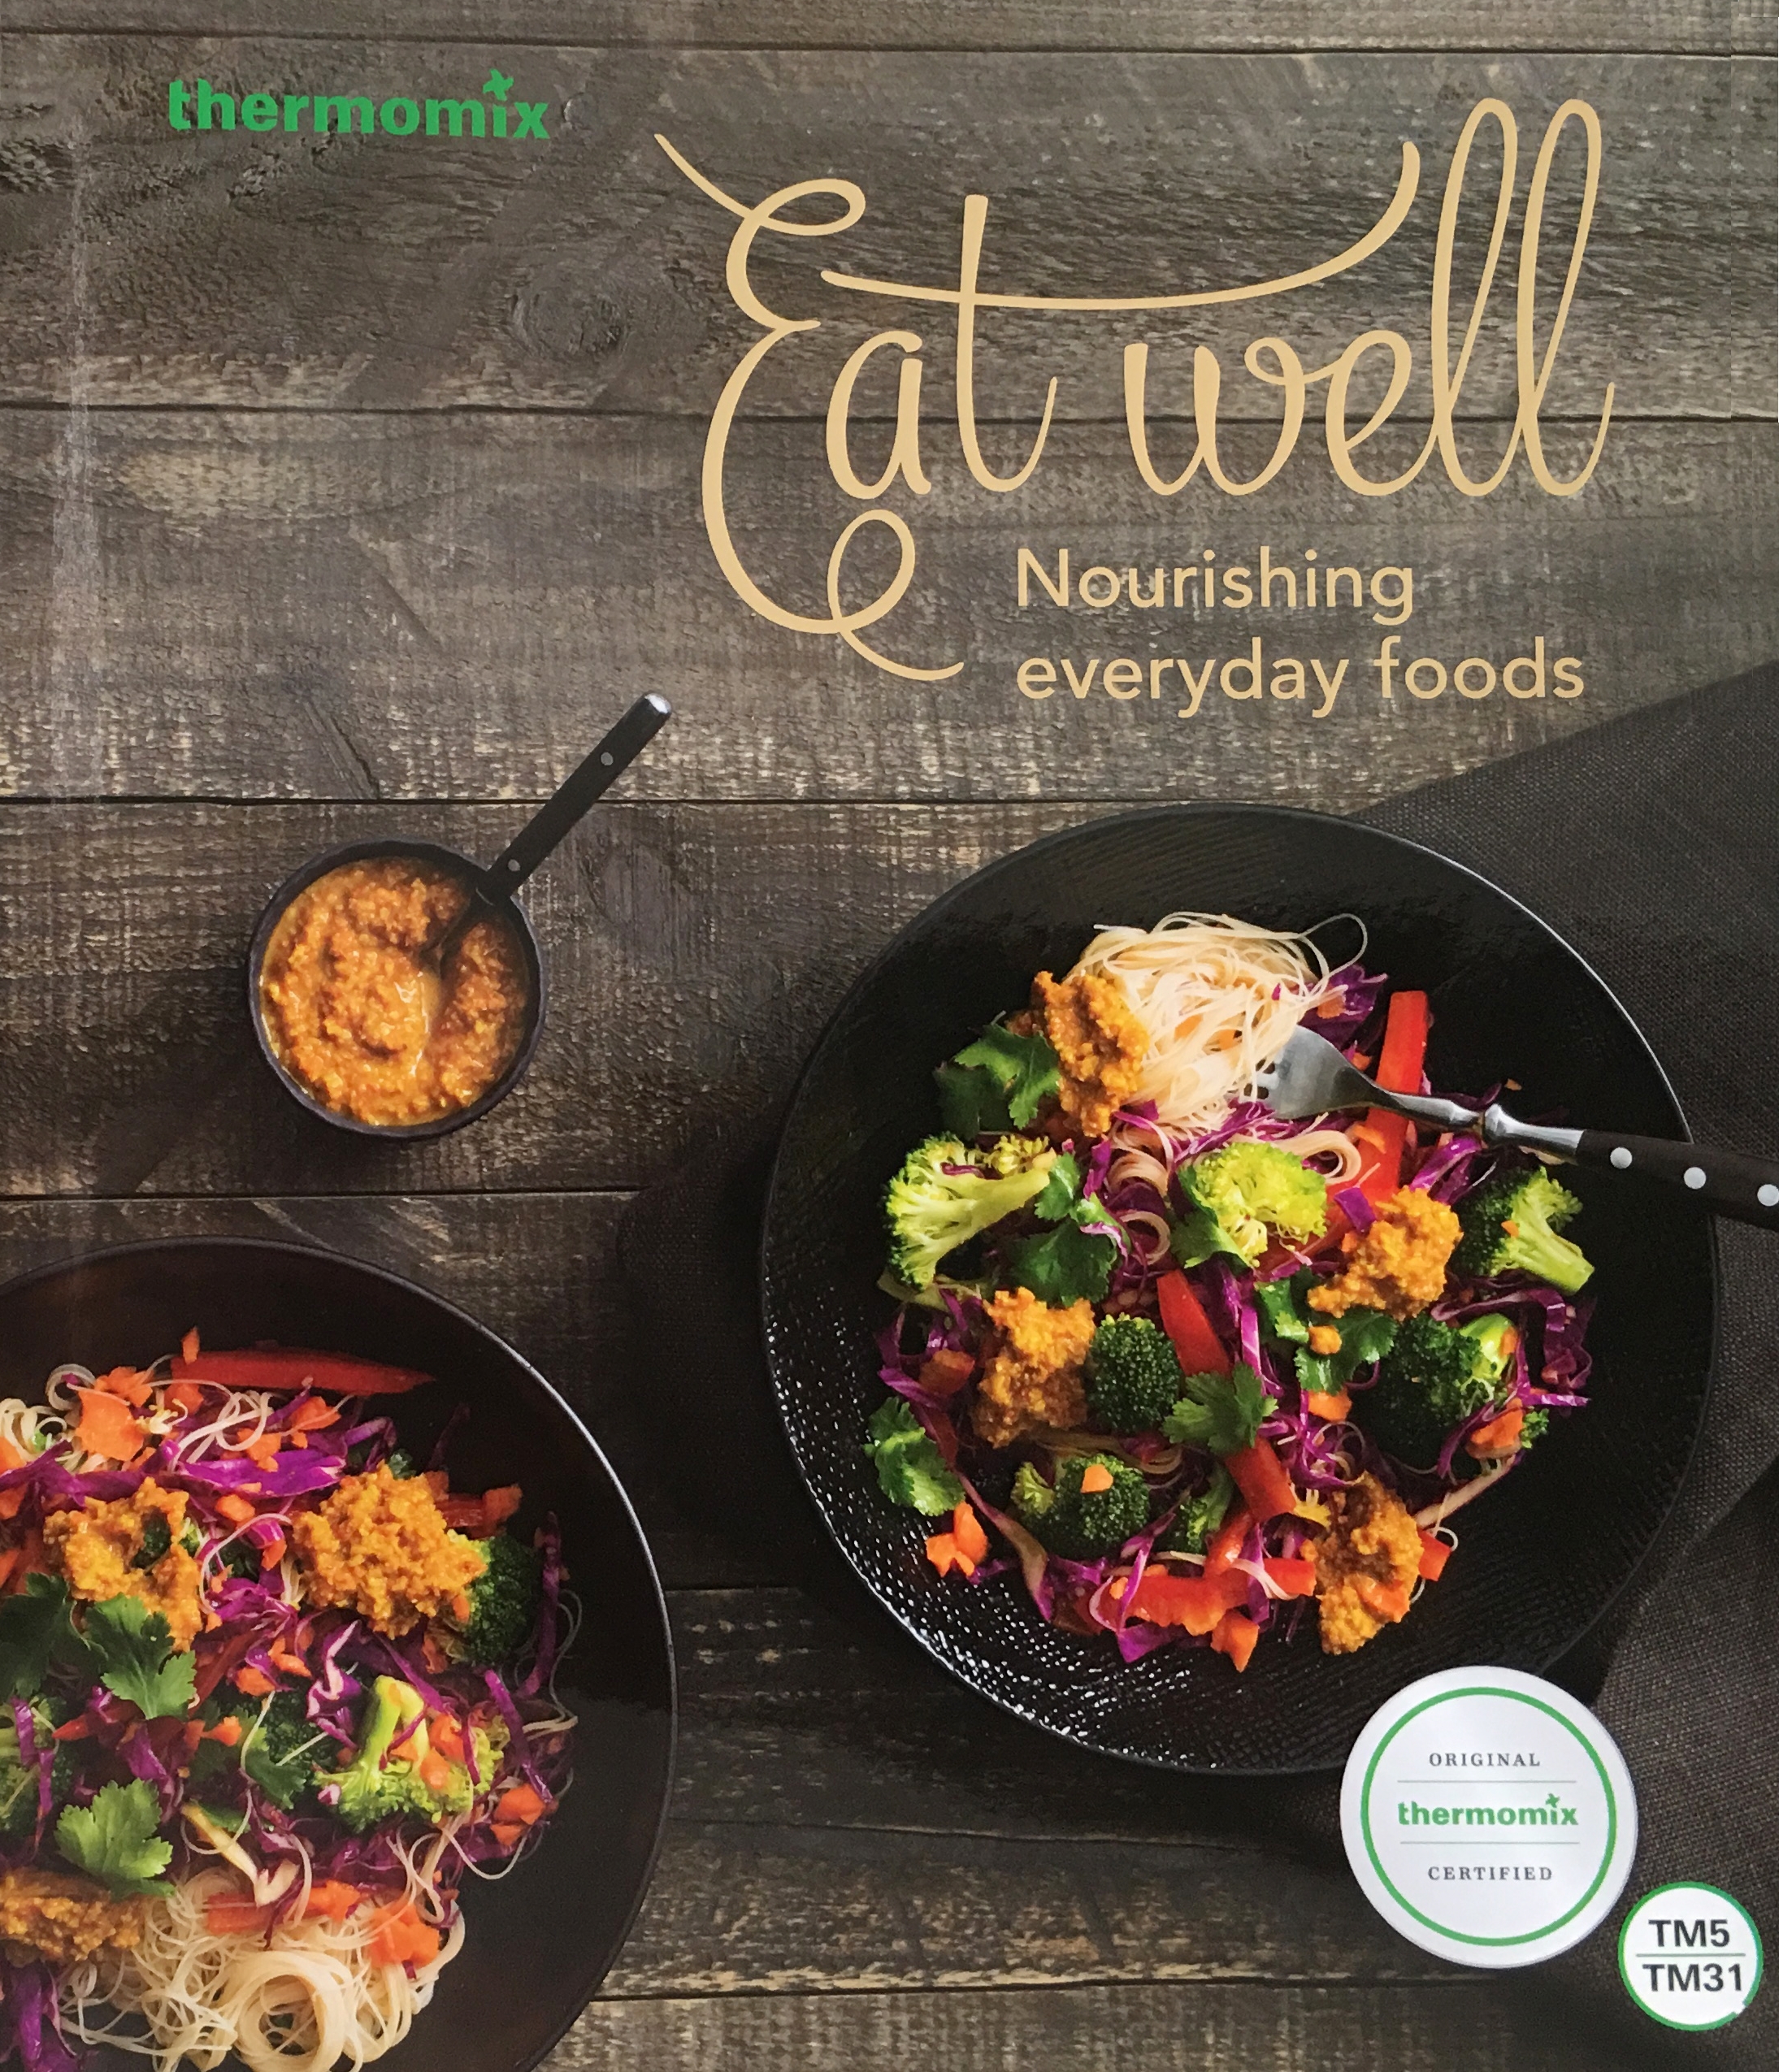 Eat Well: Nourishing Everyday Foods! Cookbook Now Available